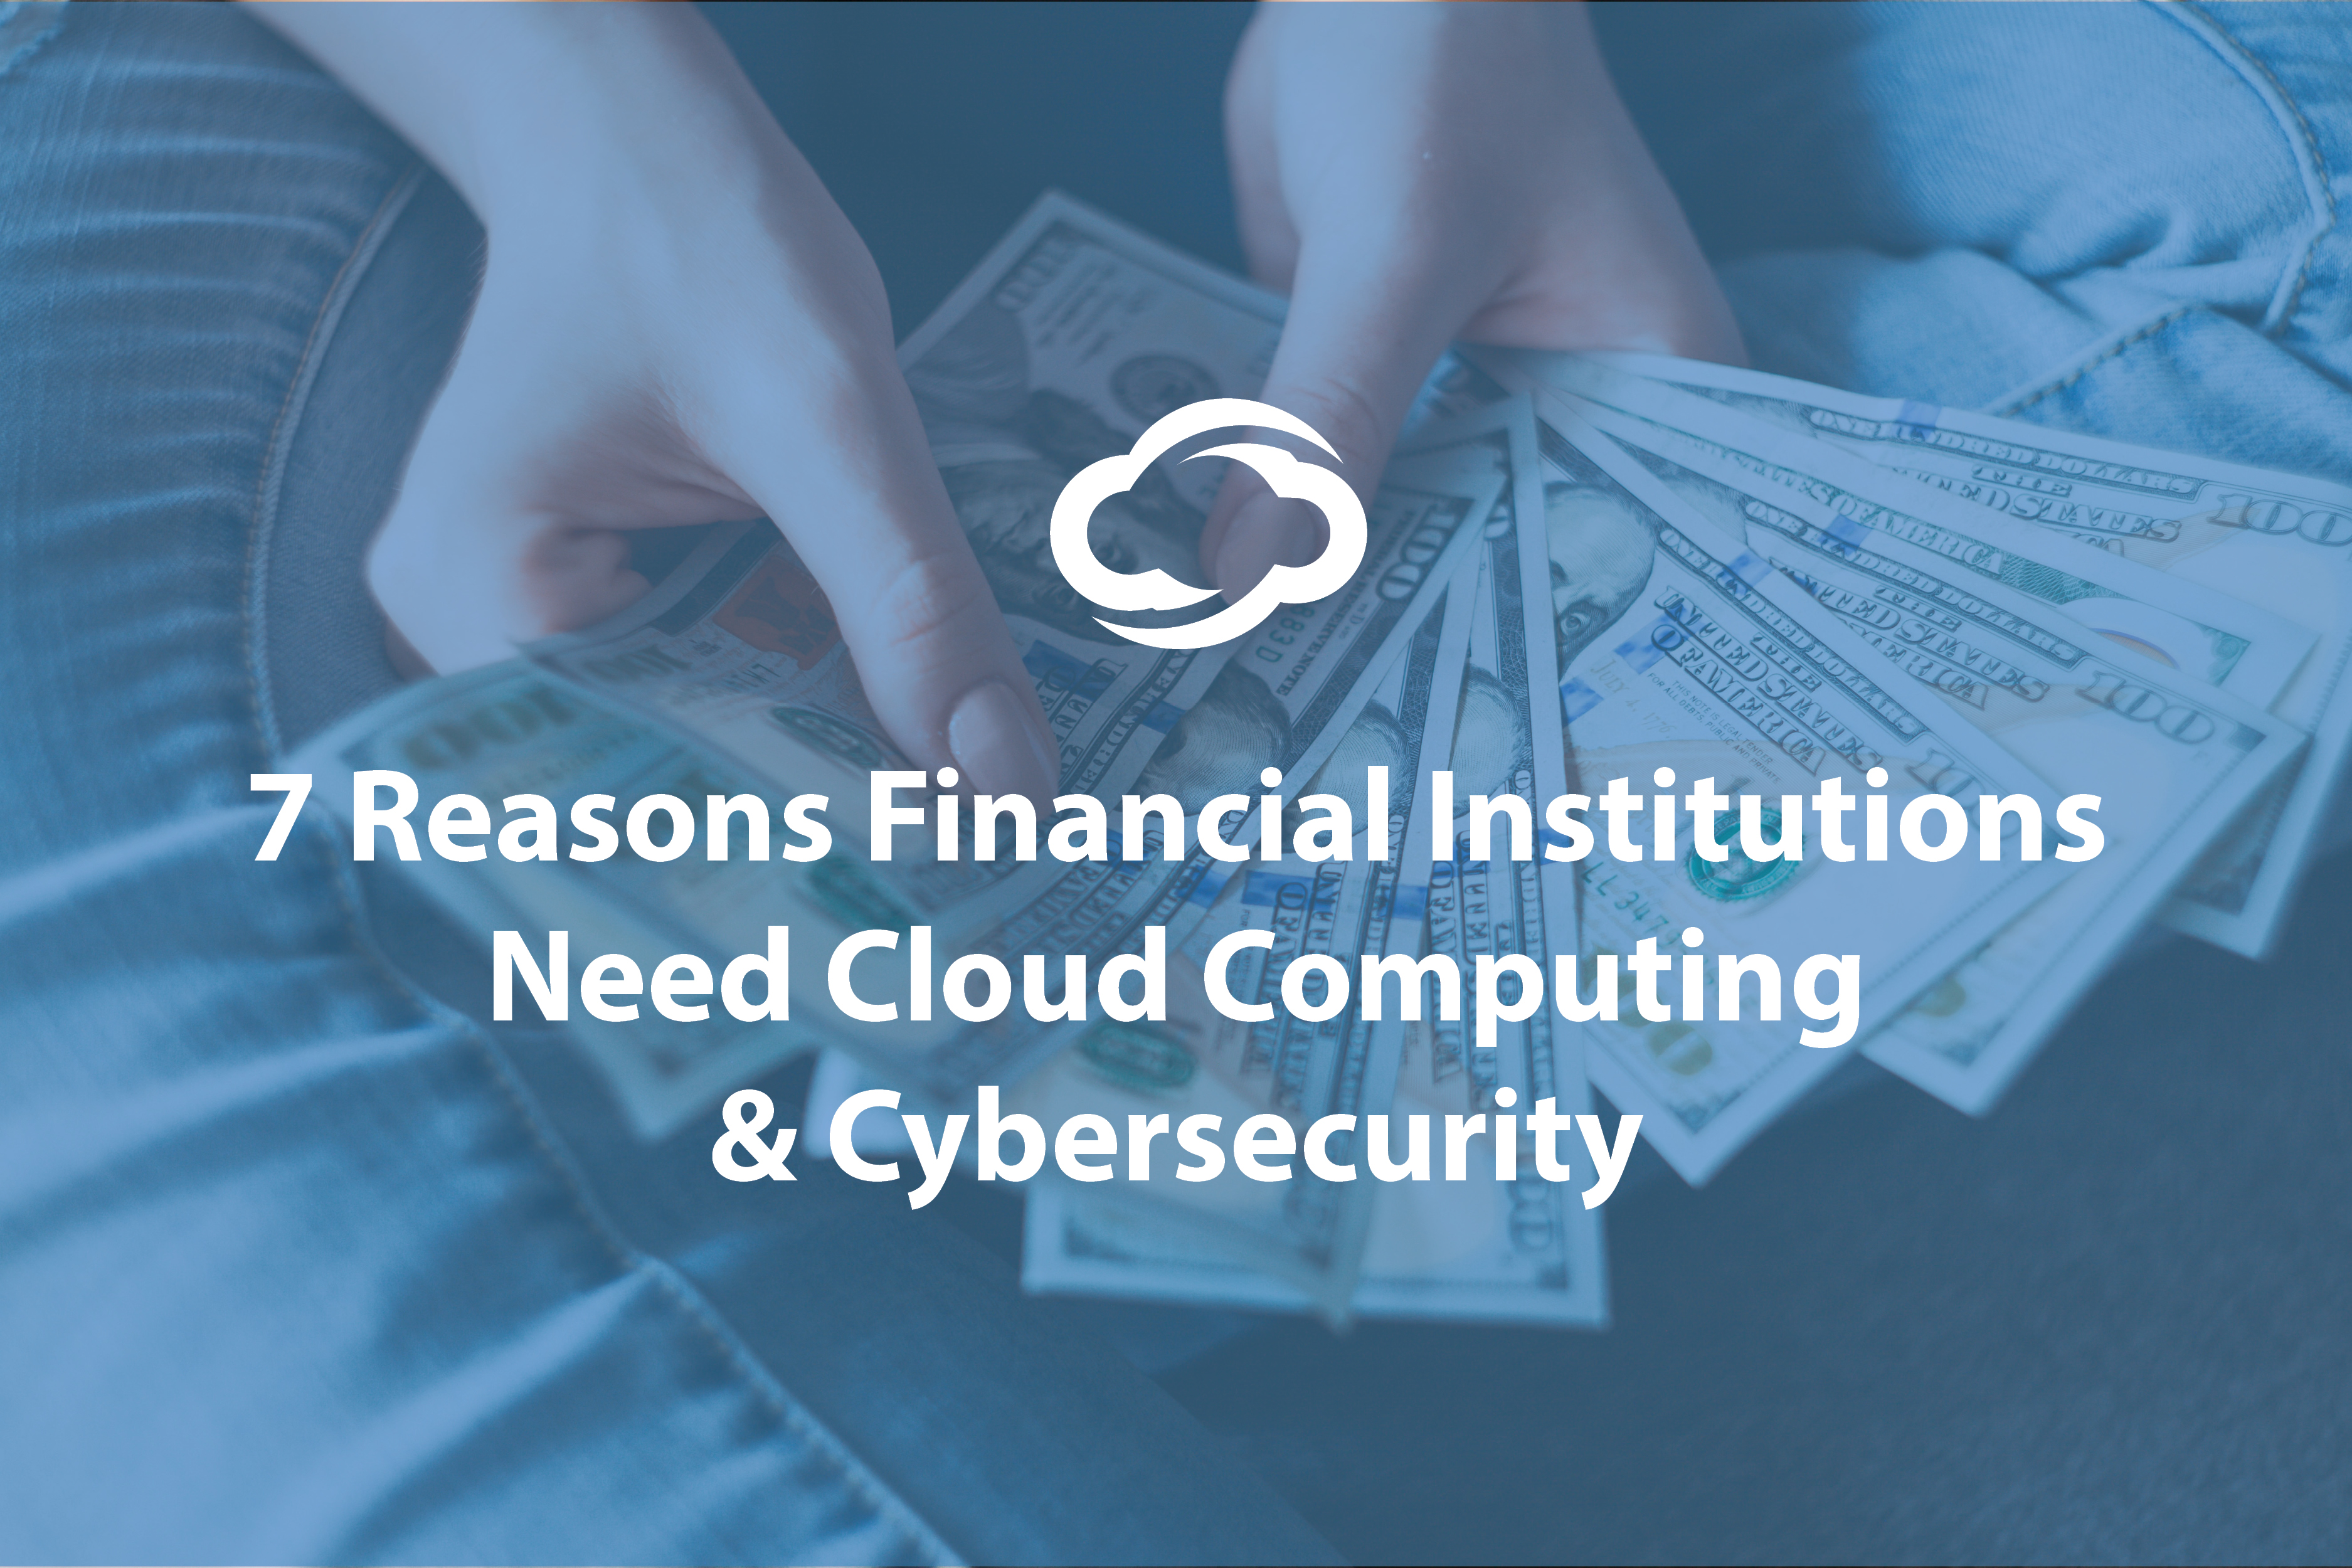 Blog Image - 7 Reasons Financial Institutions Need Cloud Computing and Cybersecurity